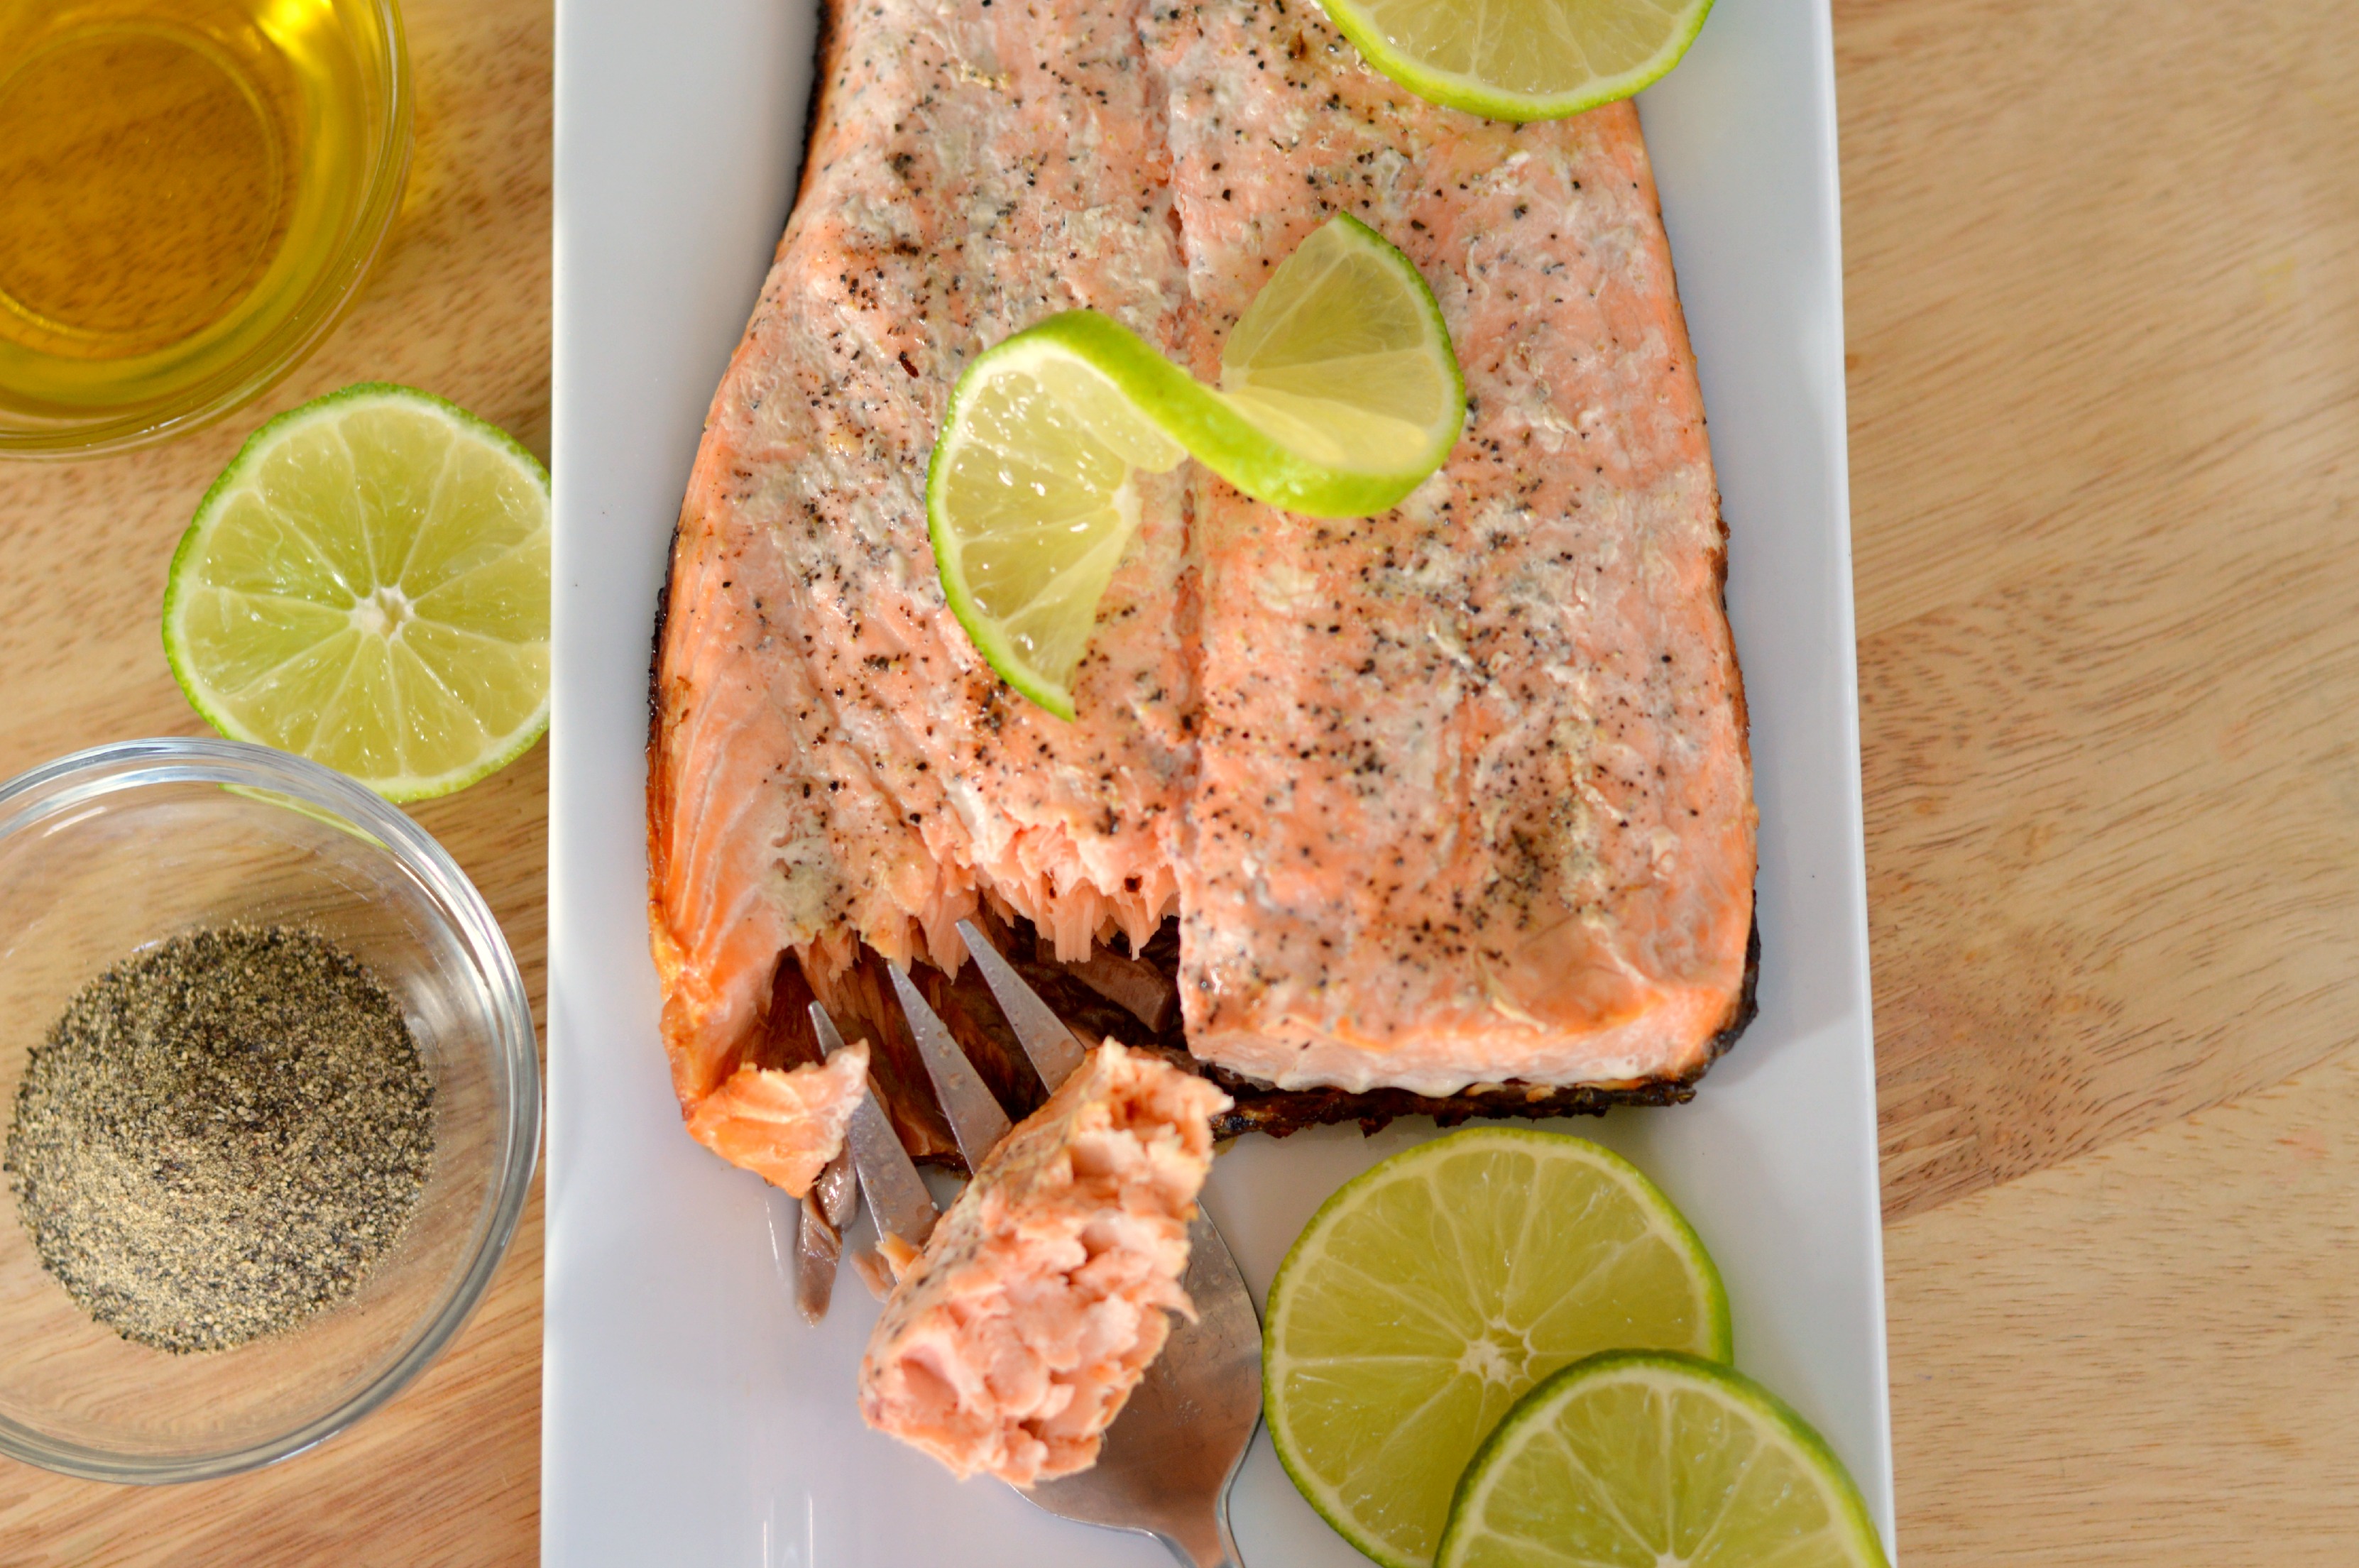 Love smoked salmon, but don’t have an expensive smoker? Learn how to Smoke Salmon on the grill with wood chips. In less than an hour, you’ll have zesty, smoked, budget-friendly salmon on the table.